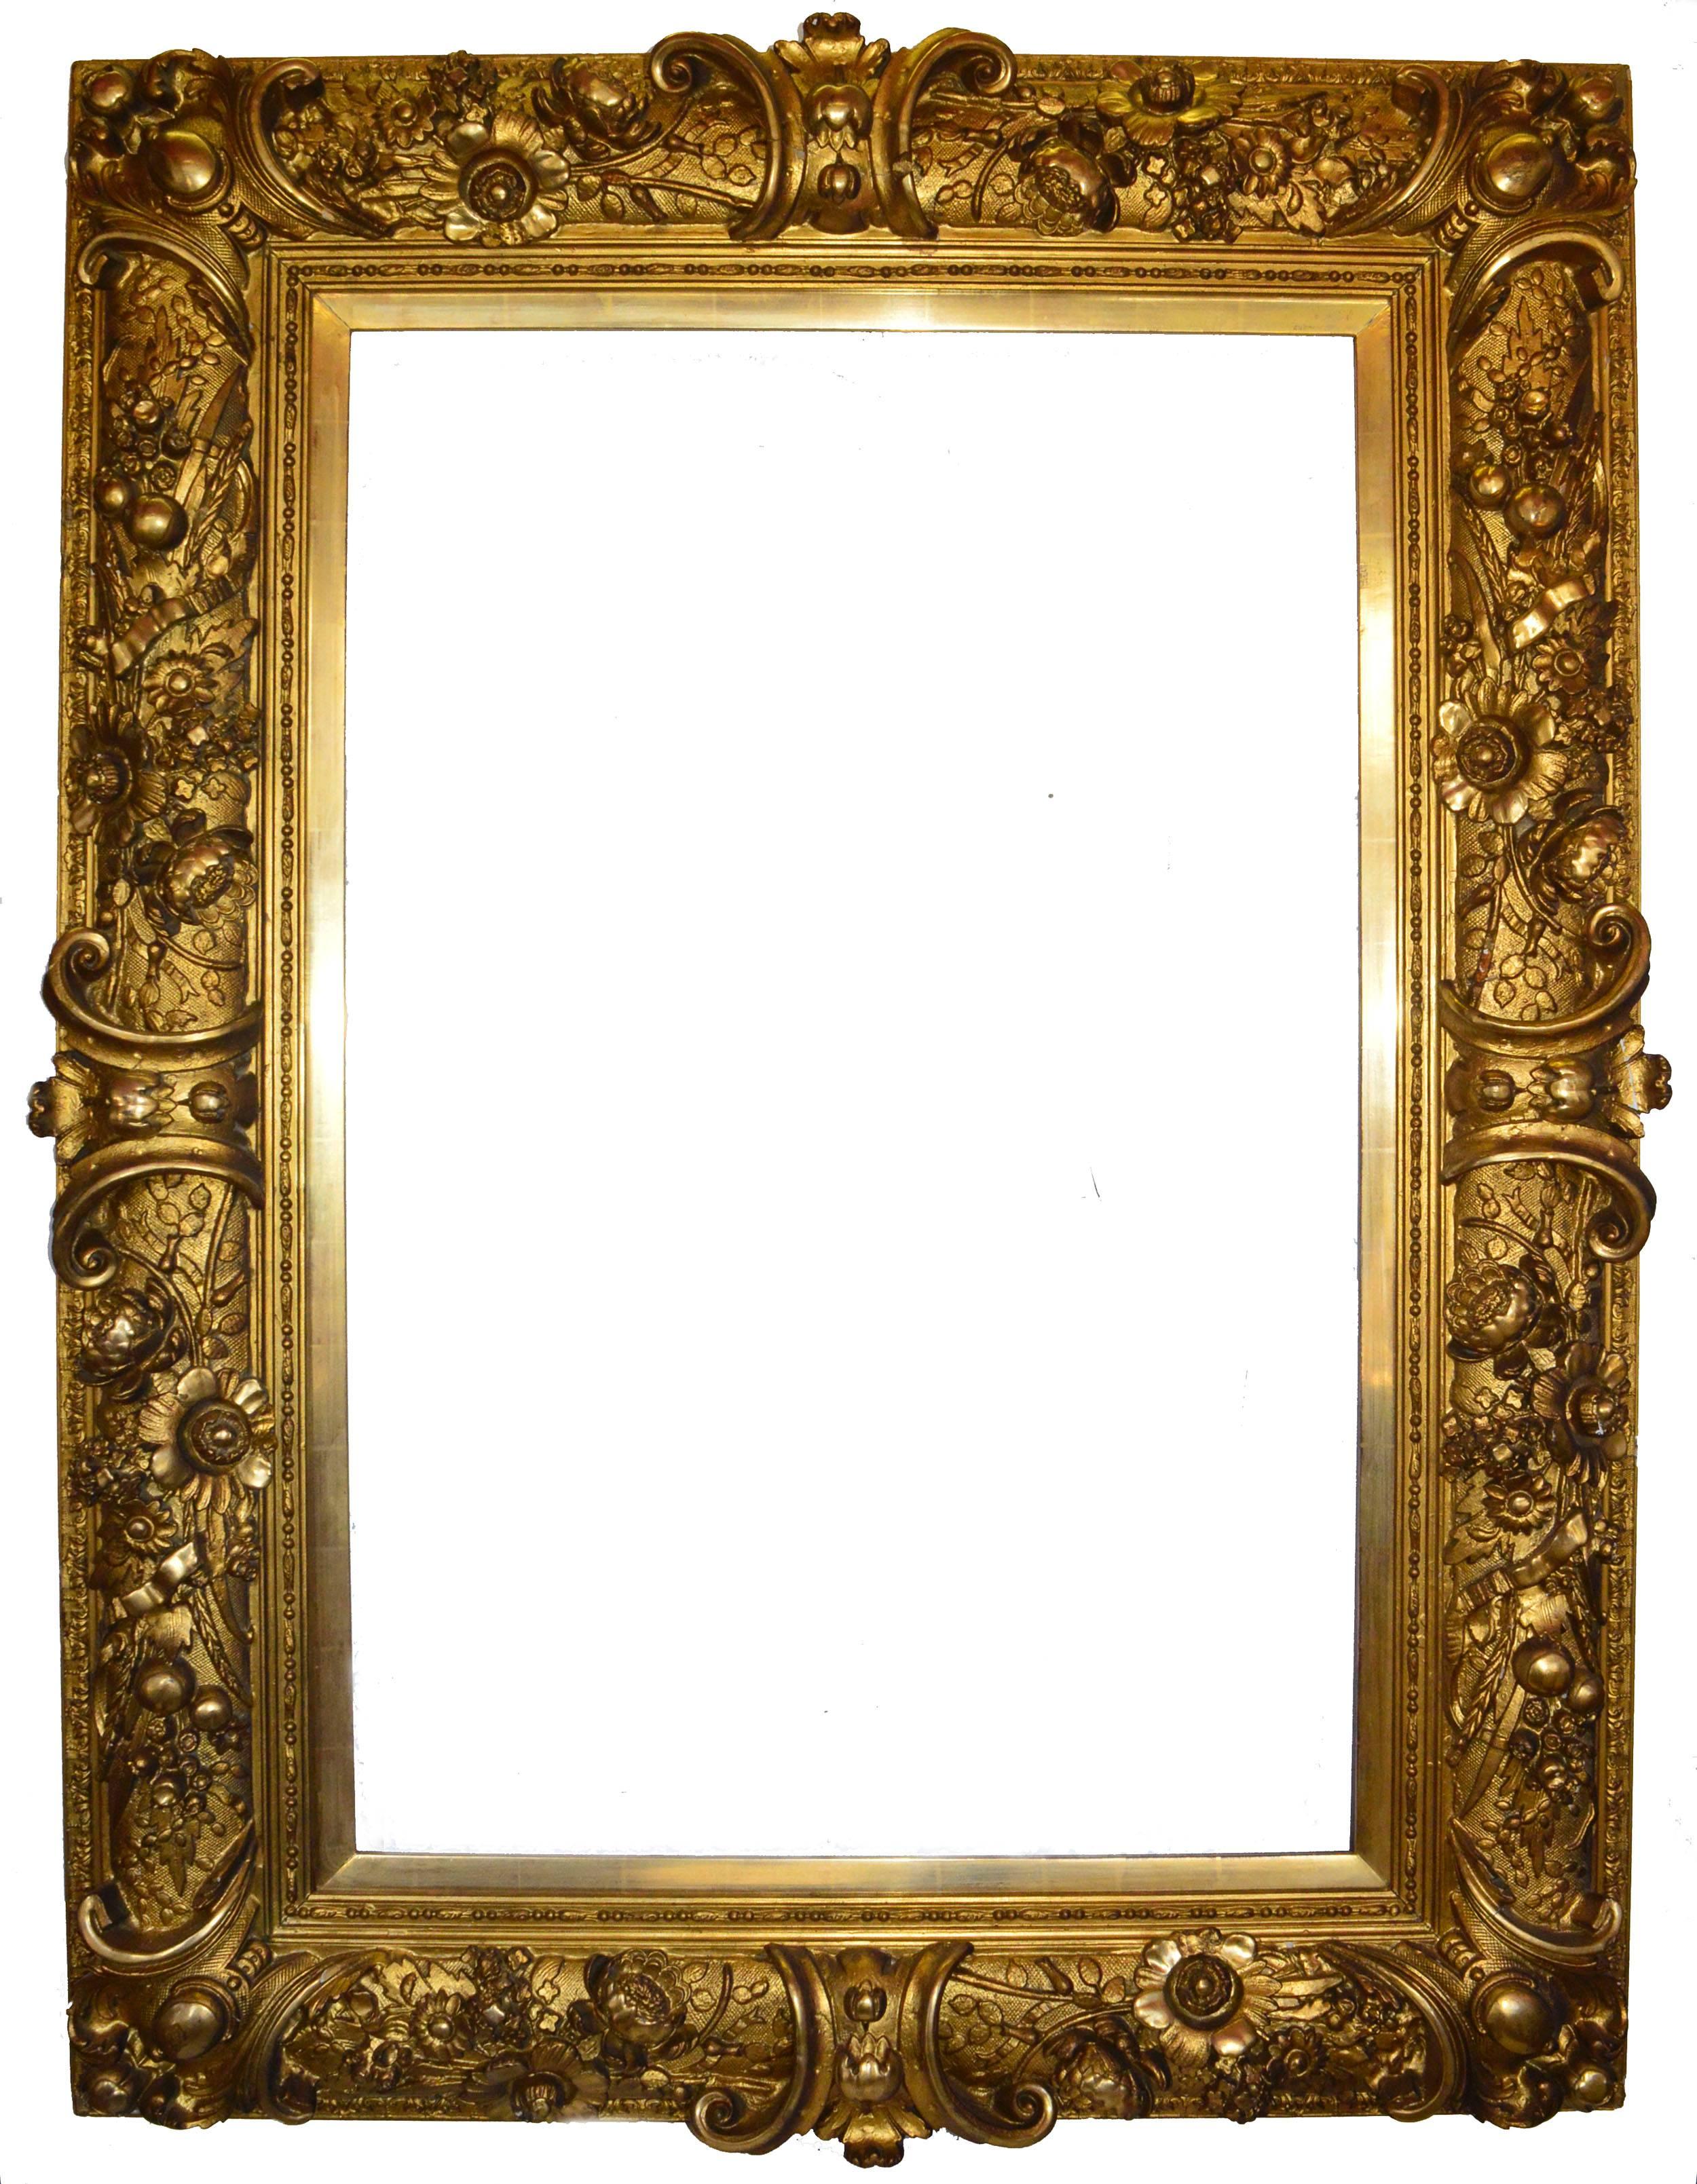 Substantial giltwood Baroque-style frame from Europe. Would be a grand finishing touch for a painting of the period or for a mirror.
Opening, 41" H x 26" W.
Frame width, 7.75".
Outside dimensions, 56.25" H x 41.5" W x